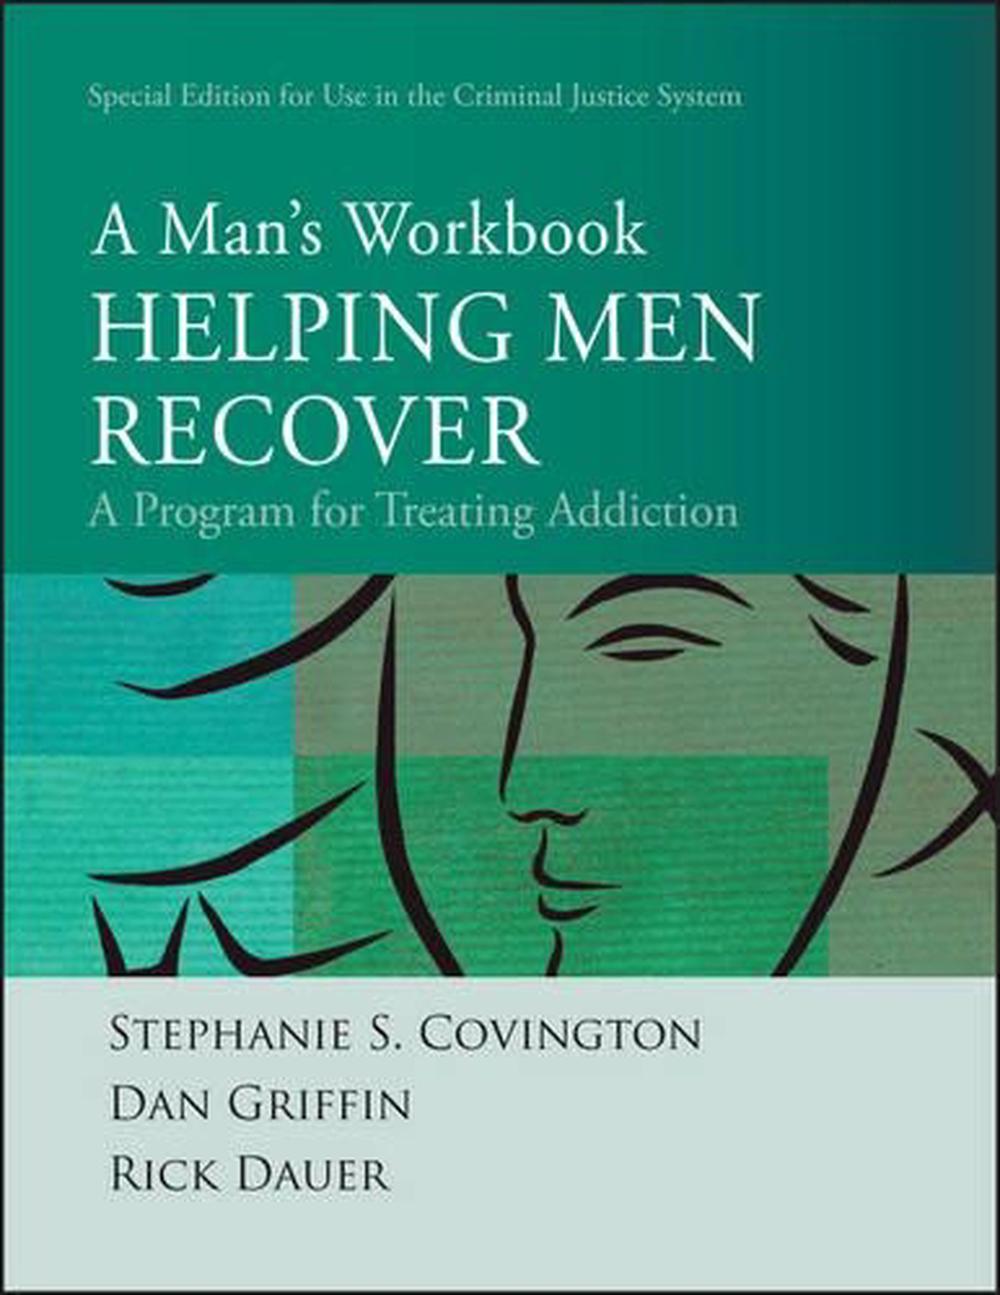 Helping Men Recover A Man's Workbook, Special Edition for the Criminal